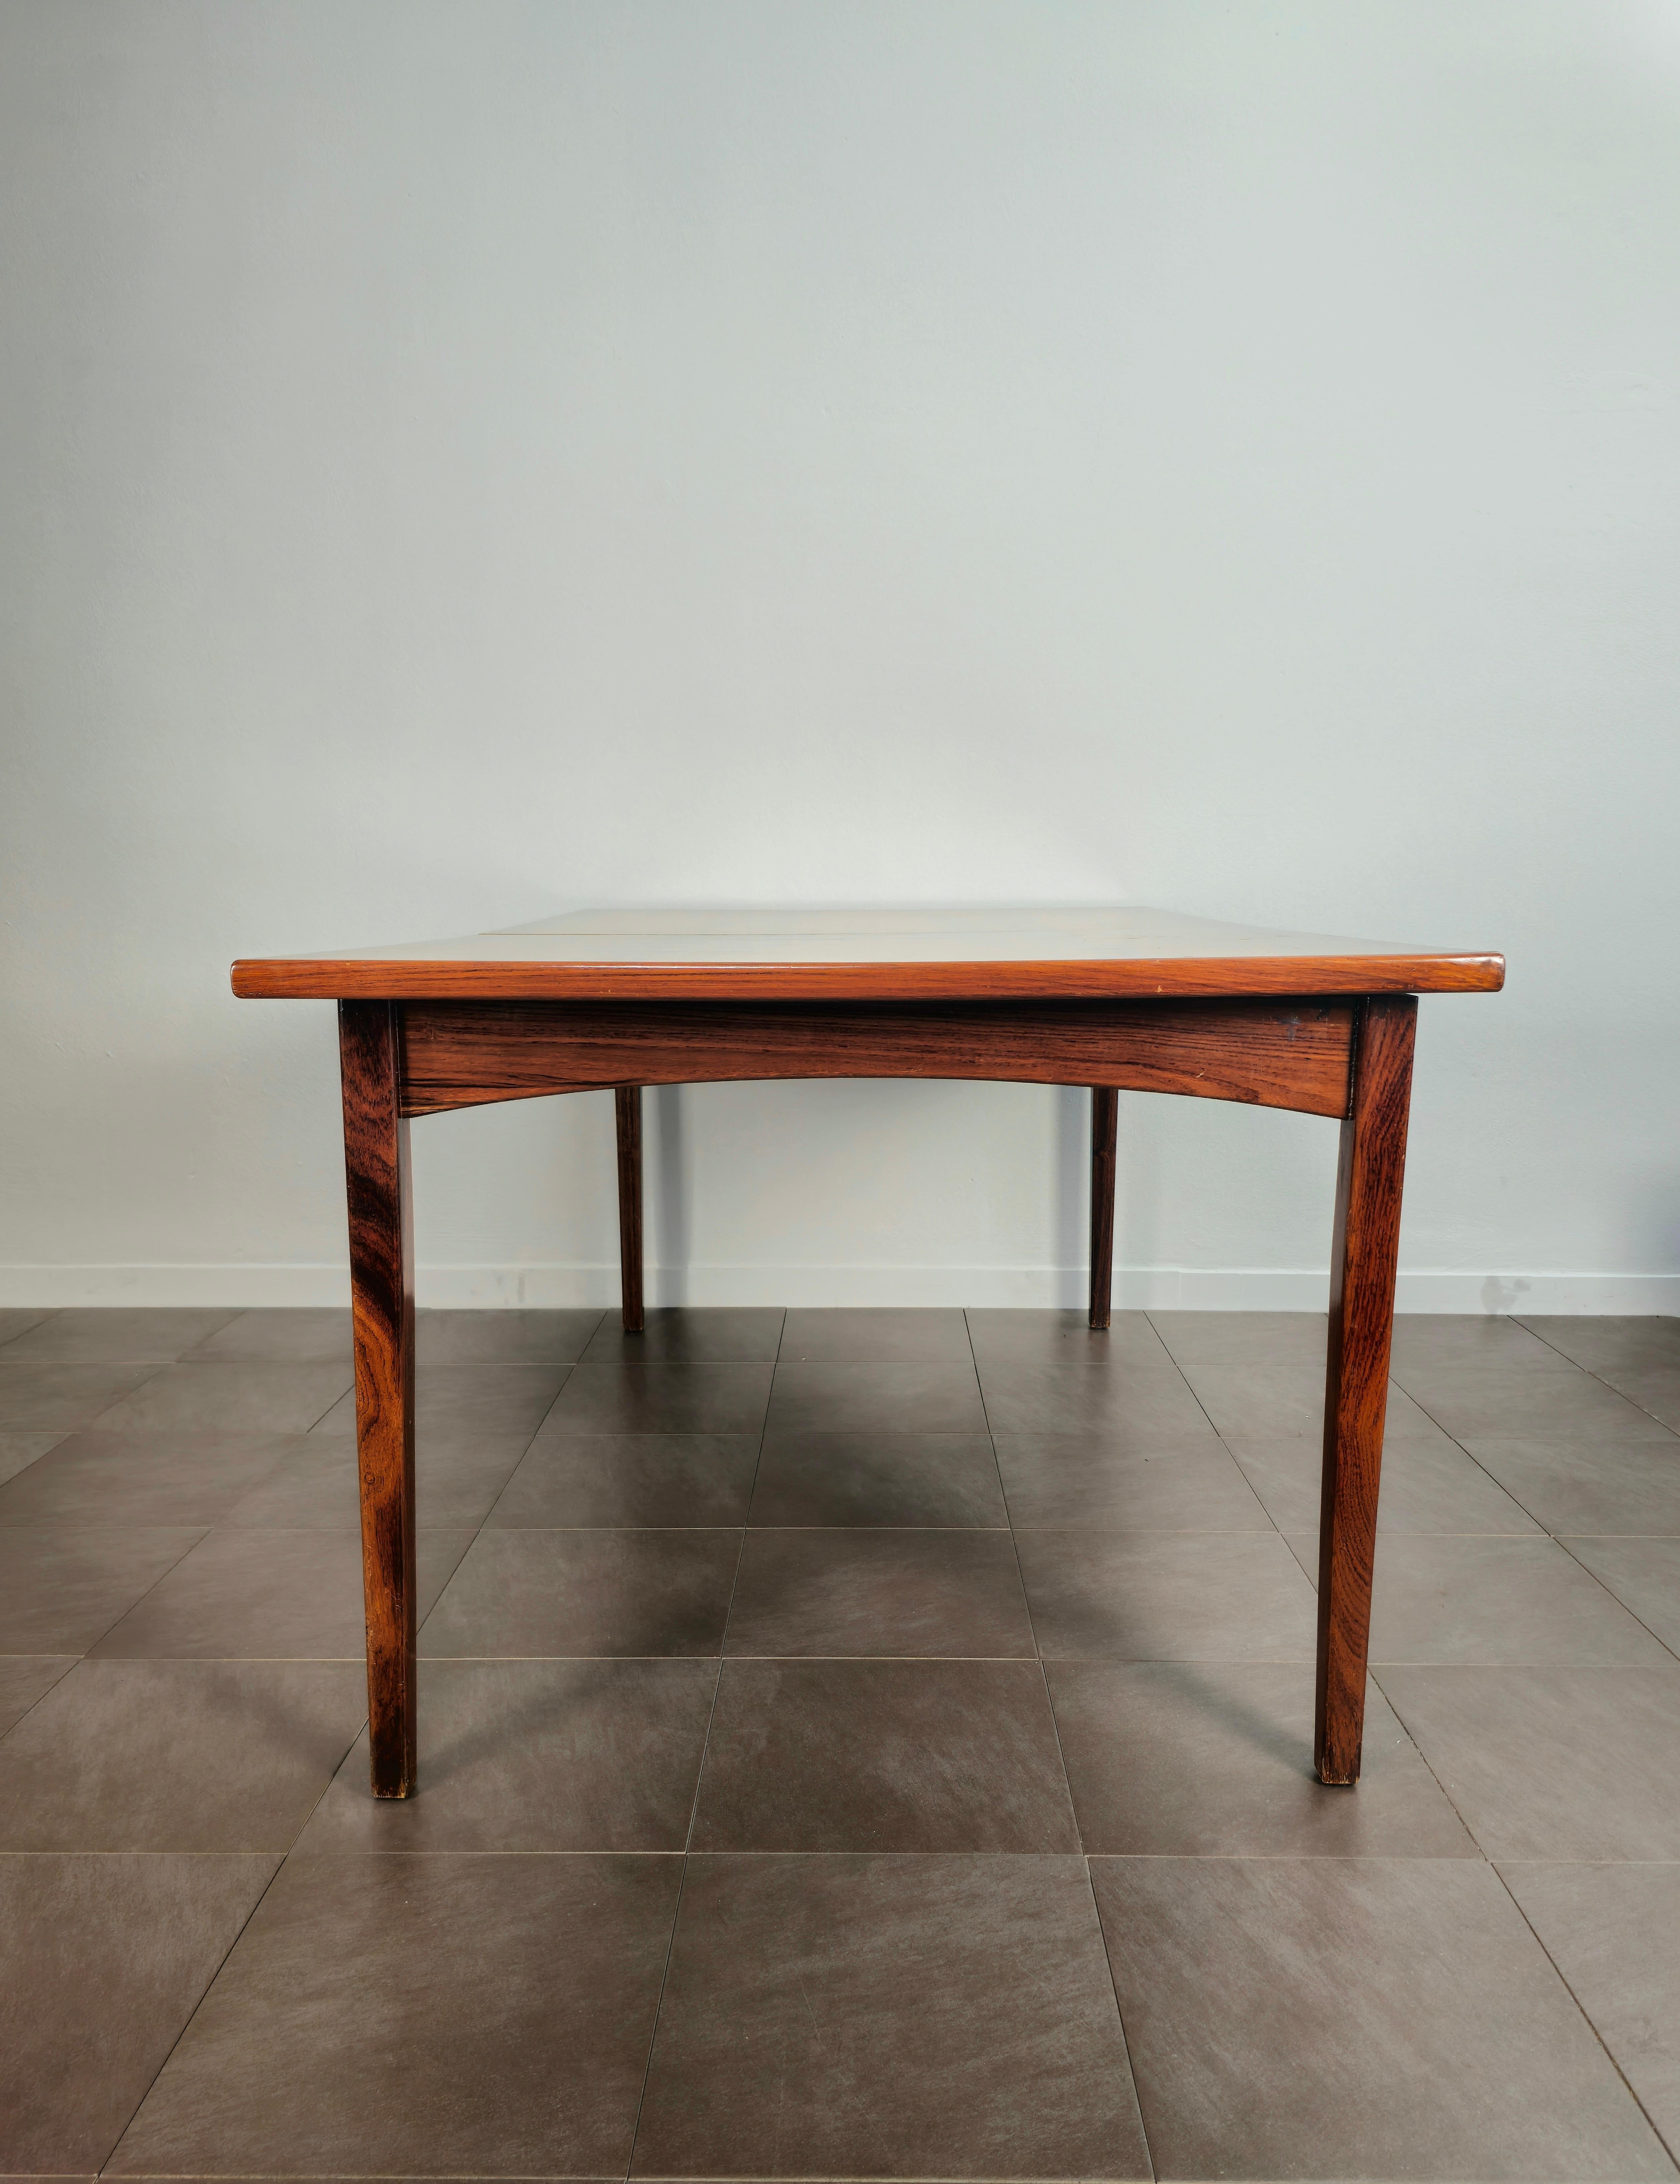 20th Century Wood Dining Room Table Extendable Large Rectangular Midcentury, Denmark, 1960s For Sale